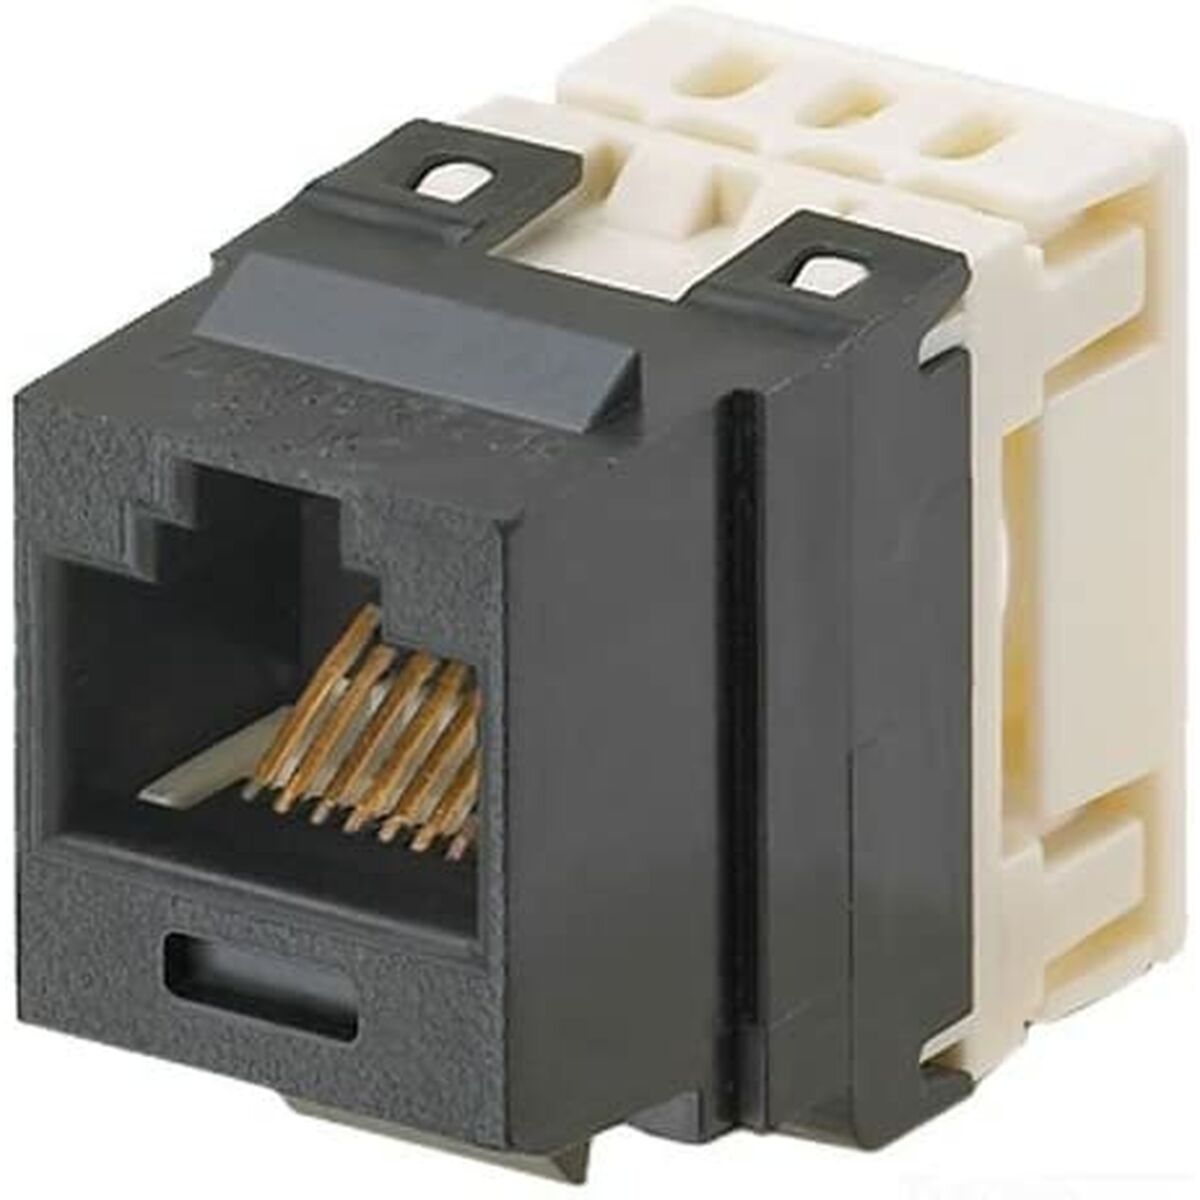 RJ45 Connector Panduit NK688MBL, Panduit, Computing, Cabling and connectivity, rj45-connector-panduit-nk688mbl, Brand_Panduit, category-reference-2609, category-reference-2803, category-reference-2828, category-reference-t-19685, category-reference-t-7066, category-reference-t-7133, Condition_NEW, ferretería, networks/wiring, Price_20 - 50, RiotNook